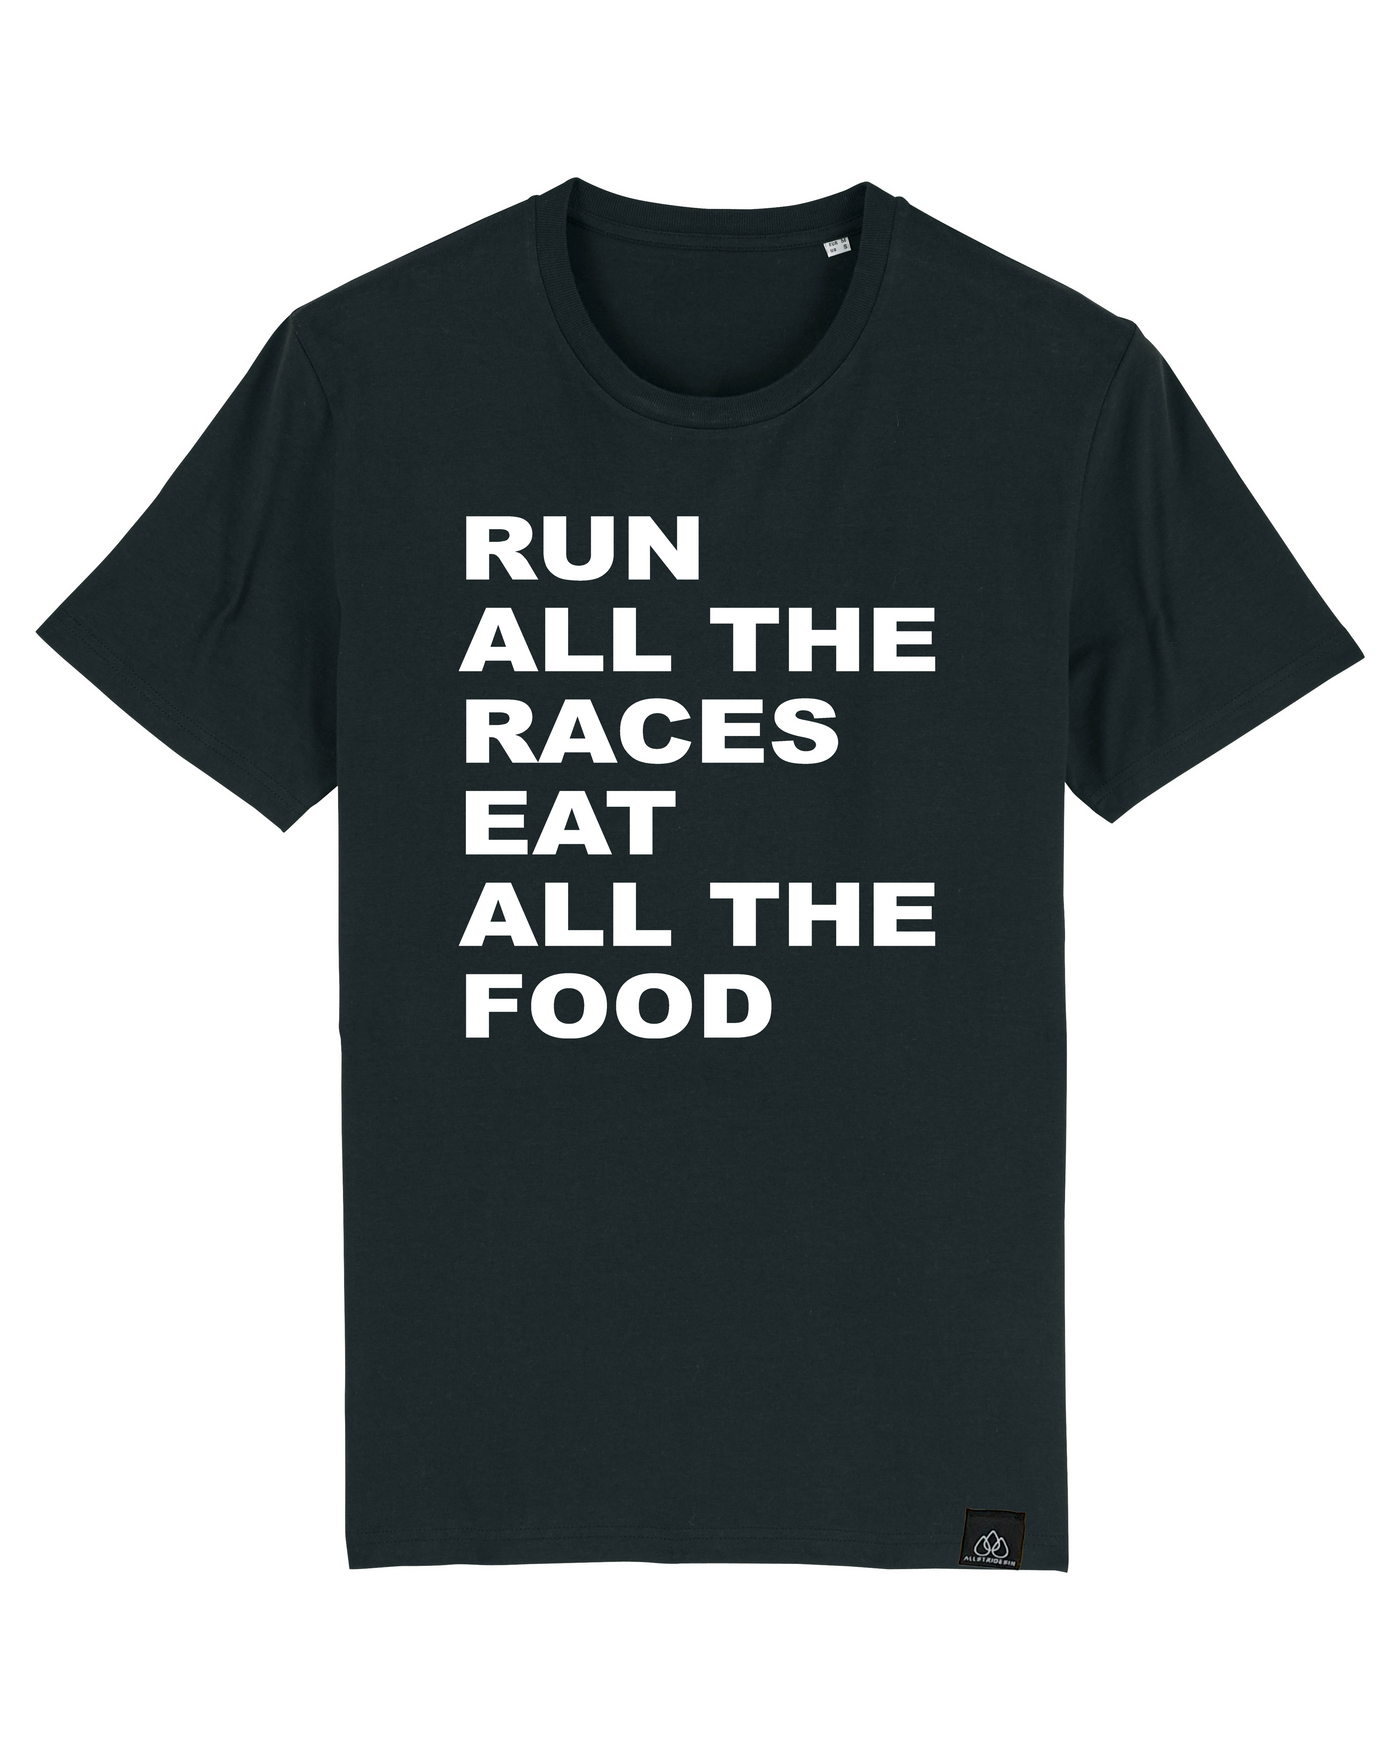 RUN ALL THE RACES EAT ALL THE FOOD - ICONIC UNISEX T-SHIRT | ALLSTRIDESIN®